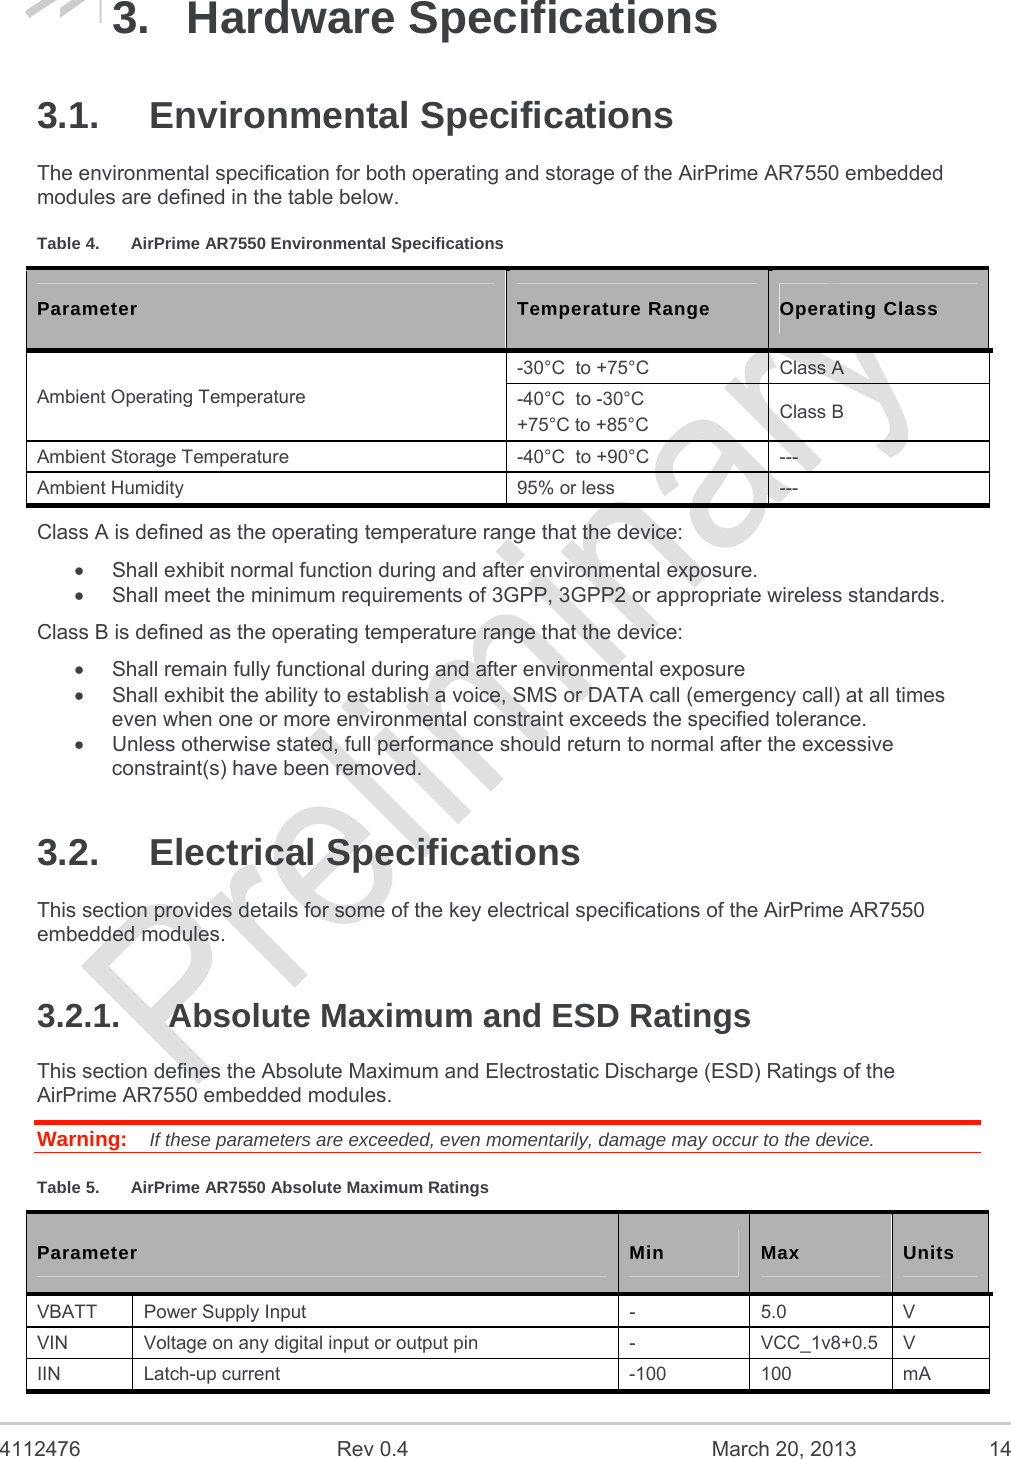  4112476  Rev 0.4  March 20, 2013  14 3. Hardware Specifications 3.1. Environmental Specifications The environmental specification for both operating and storage of the AirPrime AR7550 embedded modules are defined in the table below. Table 4.  AirPrime AR7550 Environmental Specifications Parameter  Temperature Range  Operating Class Ambient Operating Temperature -30°C  to +75°C  Class A -40°C  to -30°C +75°C to +85°C  Class B Ambient Storage Temperature  -40°C  to +90°C  --- Ambient Humidity  95% or less  --- Class A is defined as the operating temperature range that the device:   Shall exhibit normal function during and after environmental exposure.   Shall meet the minimum requirements of 3GPP, 3GPP2 or appropriate wireless standards. Class B is defined as the operating temperature range that the device:    Shall remain fully functional during and after environmental exposure   Shall exhibit the ability to establish a voice, SMS or DATA call (emergency call) at all times even when one or more environmental constraint exceeds the specified tolerance.   Unless otherwise stated, full performance should return to normal after the excessive constraint(s) have been removed. 3.2. Electrical Specifications This section provides details for some of the key electrical specifications of the AirPrime AR7550 embedded modules. 3.2.1.  Absolute Maximum and ESD Ratings This section defines the Absolute Maximum and Electrostatic Discharge (ESD) Ratings of the AirPrime AR7550 embedded modules. Warning:   If these parameters are exceeded, even momentarily, damage may occur to the device. Table 5.  AirPrime AR7550 Absolute Maximum Ratings Parameter  Min  Max  Units VBATT  Power Supply Input  -  5.0  V VIN  Voltage on any digital input or output pin  -  VCC_1v8+0.5  V IIN Latch-up current  -100  100  mA 